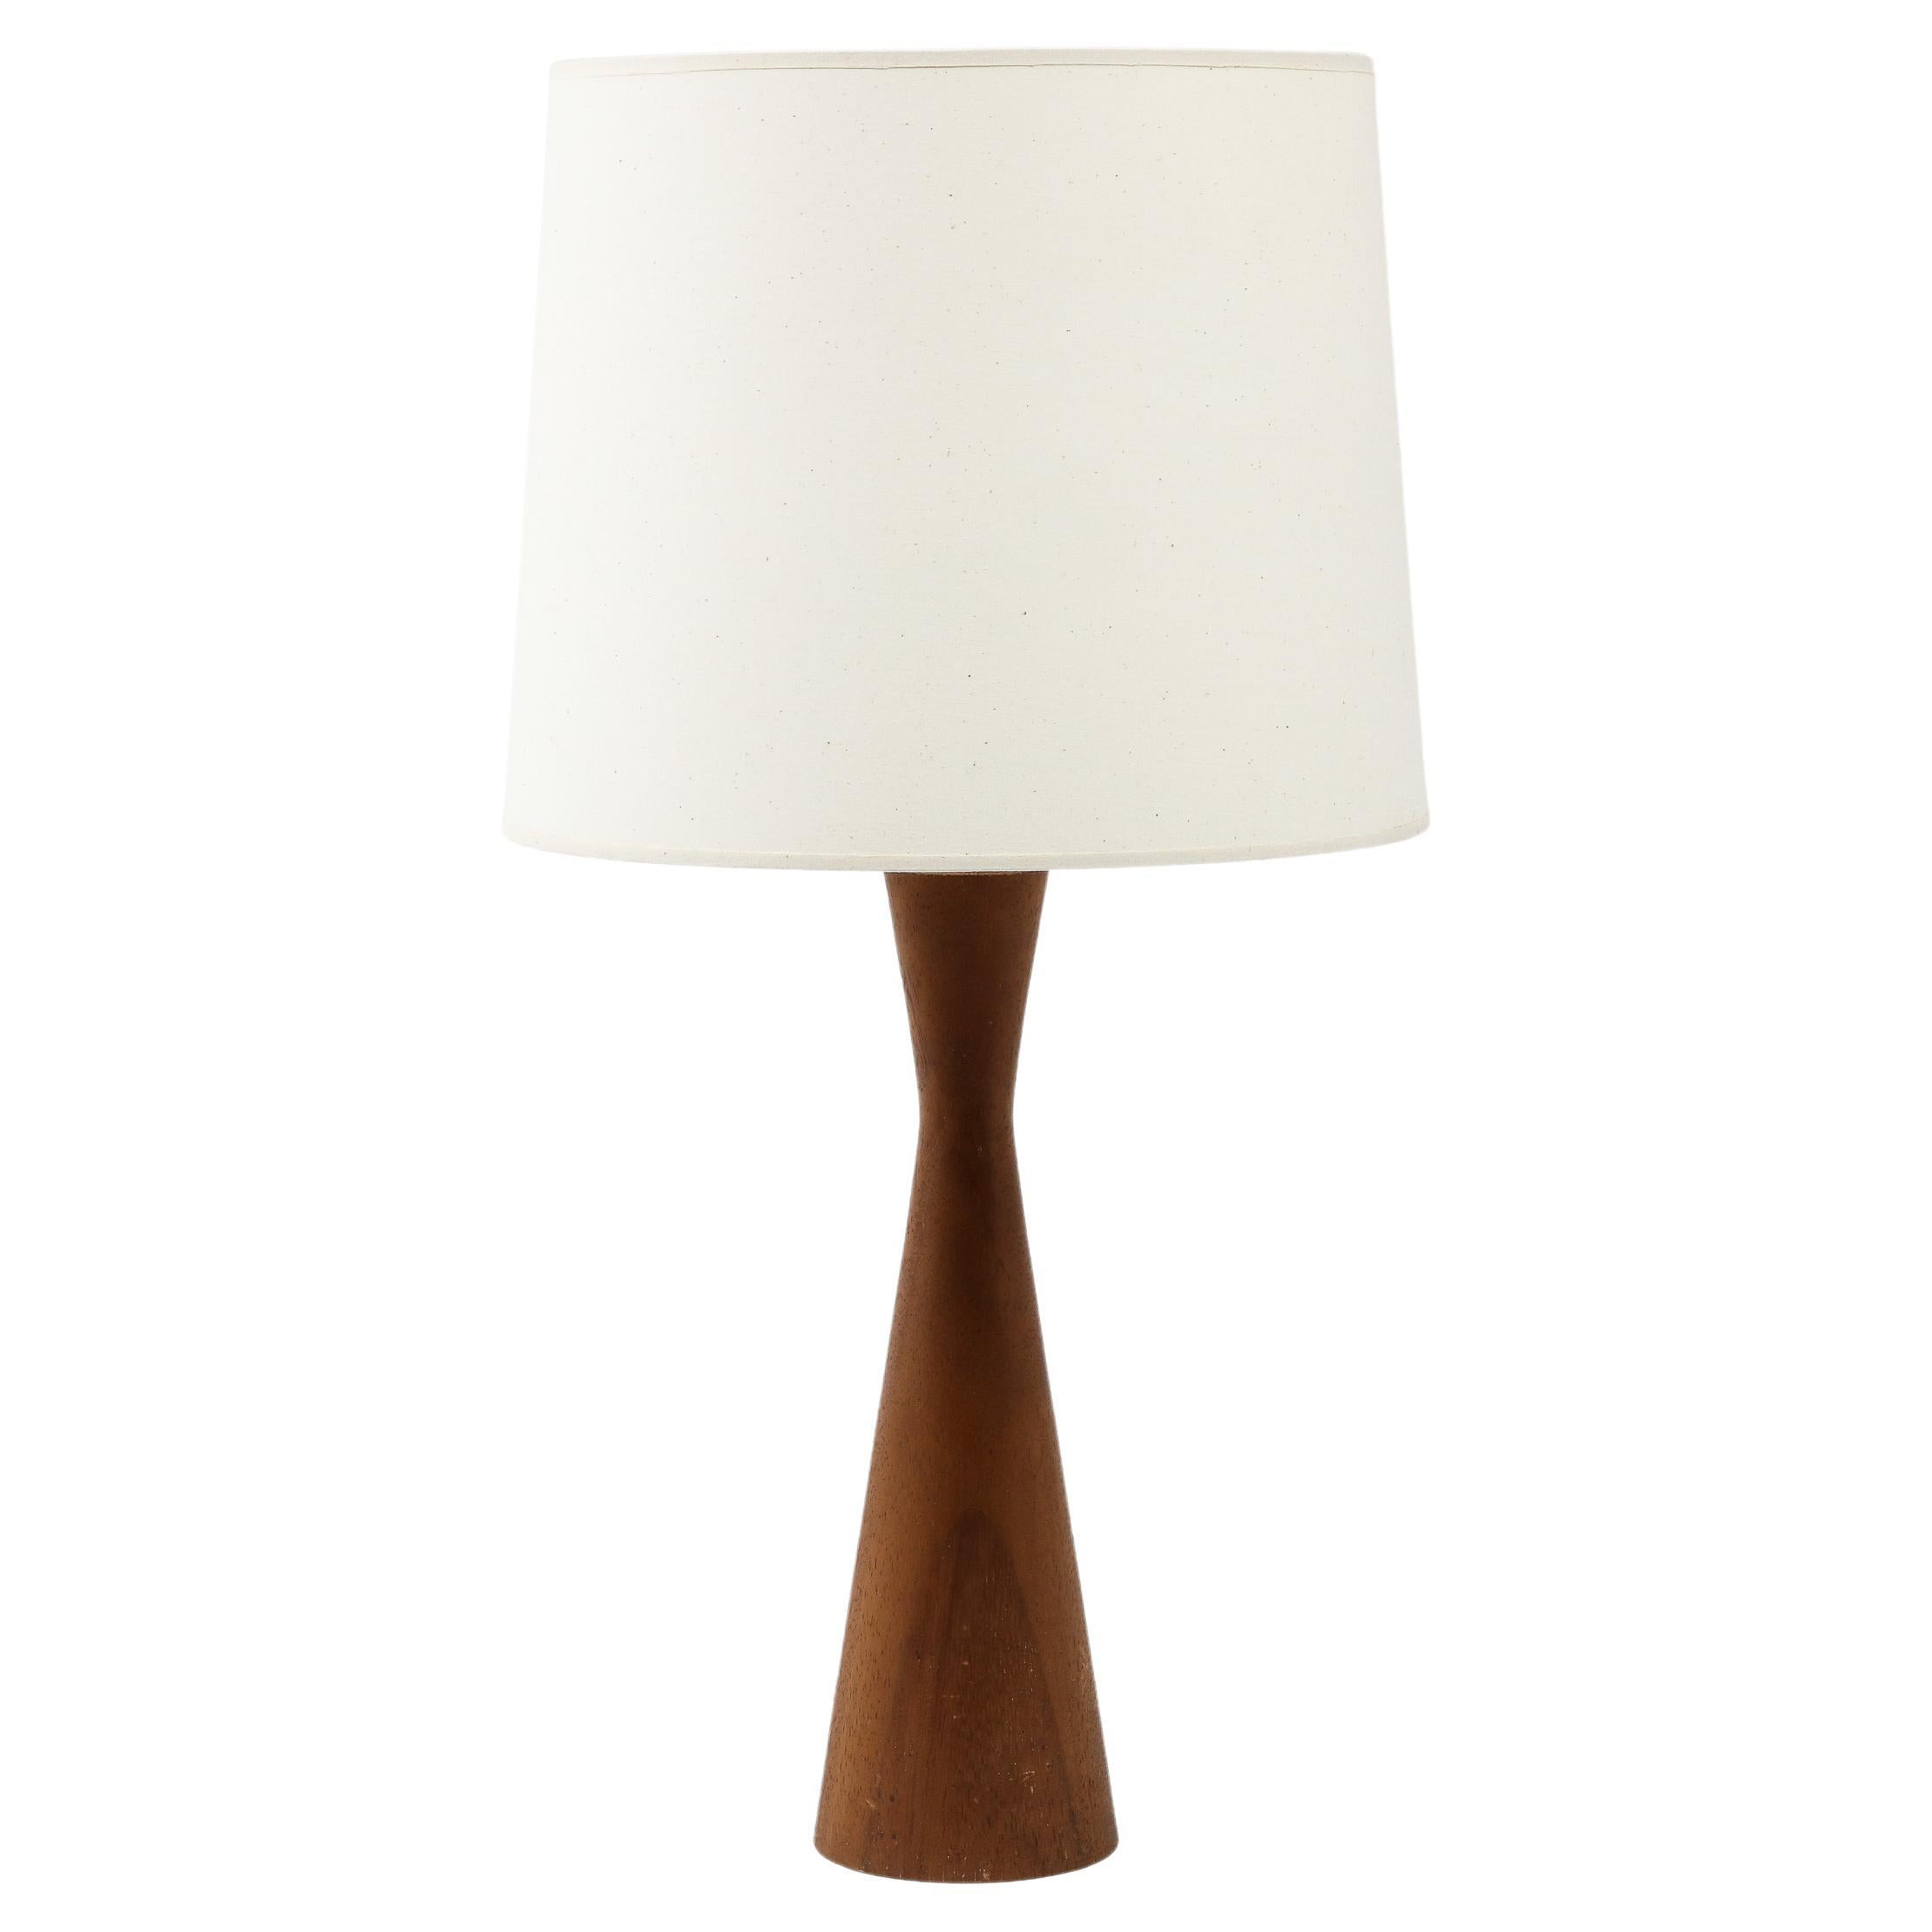 Powell Style Teak Table Lamp, USA 1960's For Sale